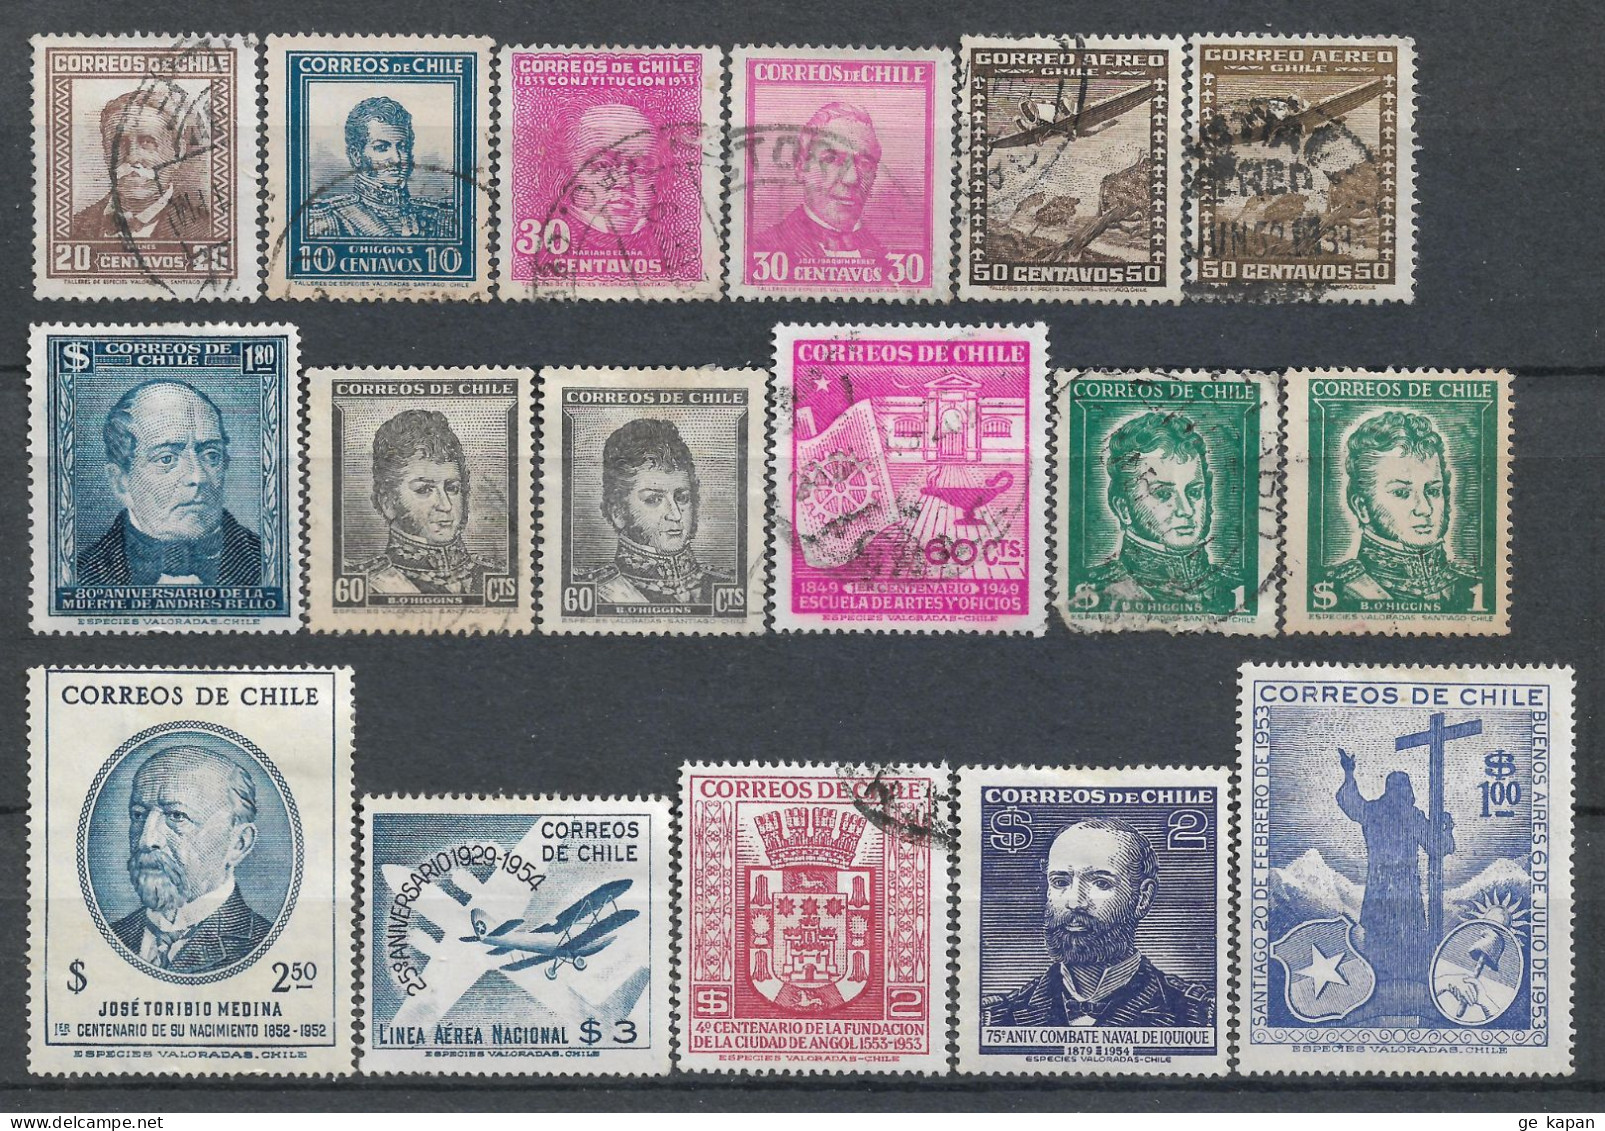 1931-1955 CHILE Set Of 17 Used Stamps (Michel # 186,195,196,198,336,354,360x,440,463x,463y,472,489,490,495,499) CV €4.00 - Chili